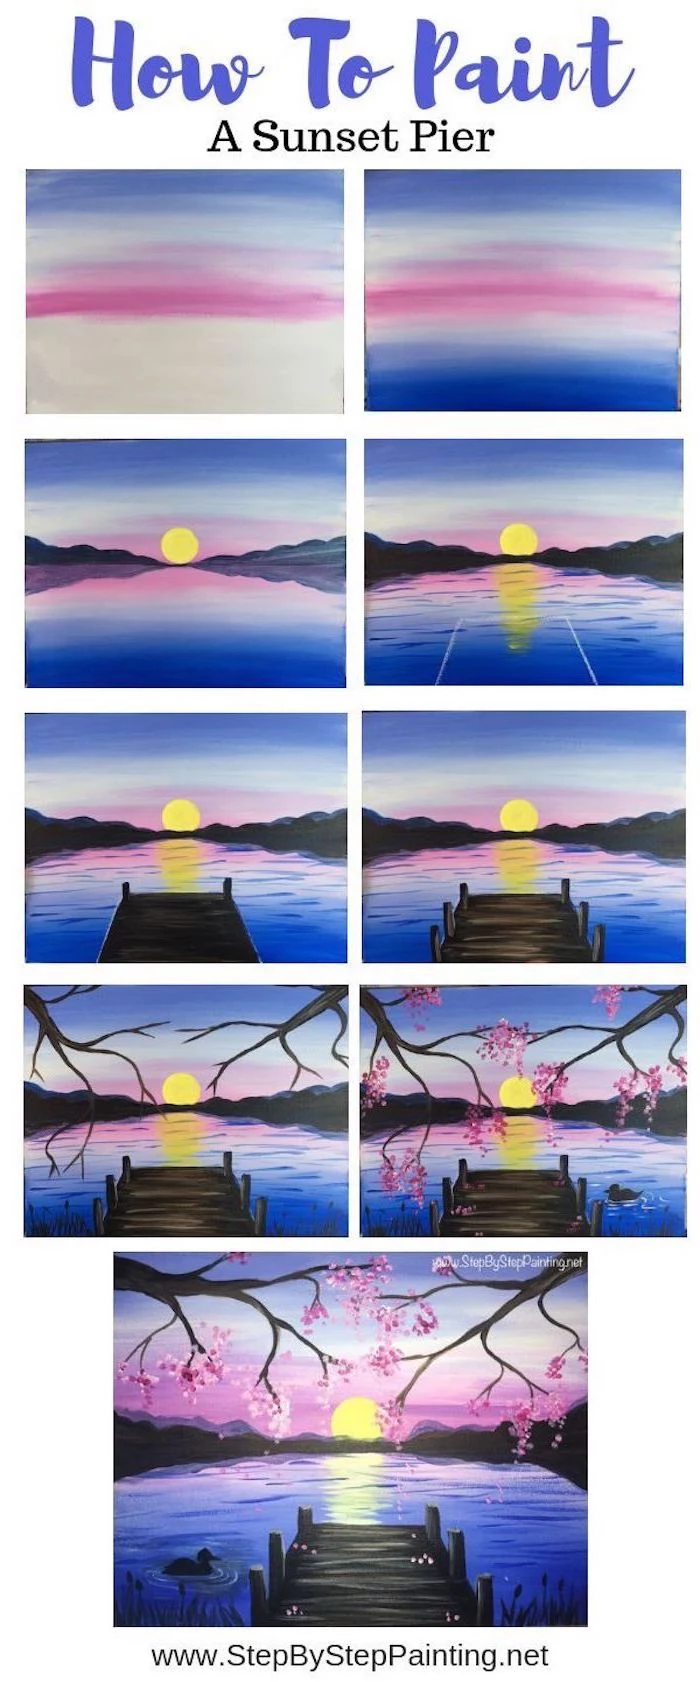 how to paint a sunset pier, photo collage of step by step diy tutorial, acrylic painting techniques